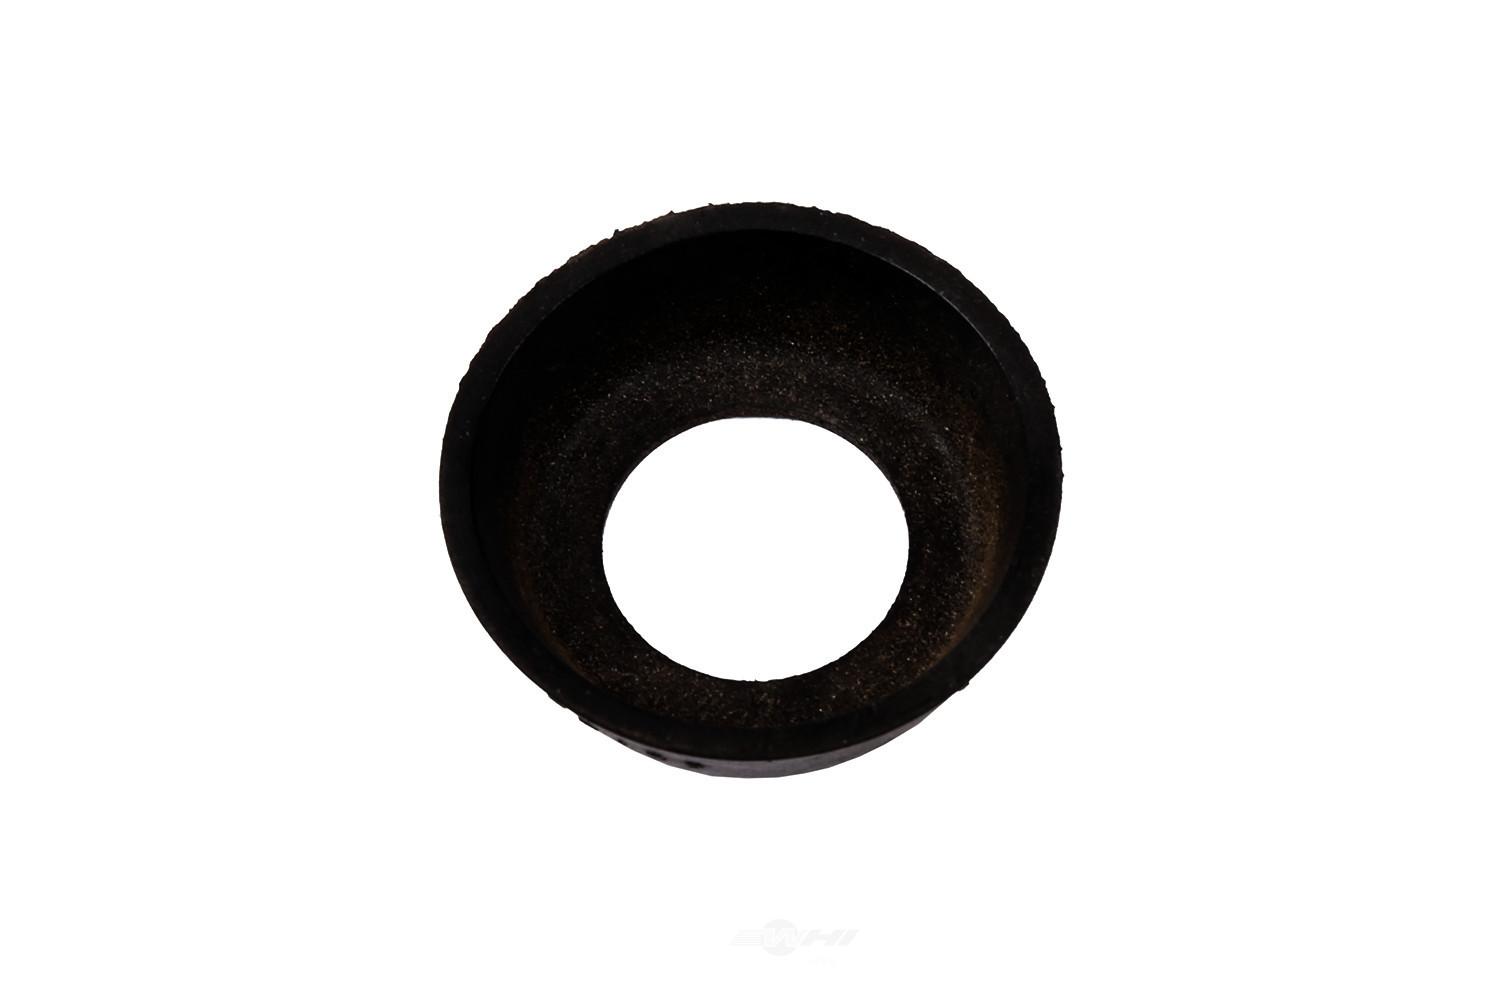 GM GENUINE PARTS - Steering Center Link Bushing - GMP 05693125